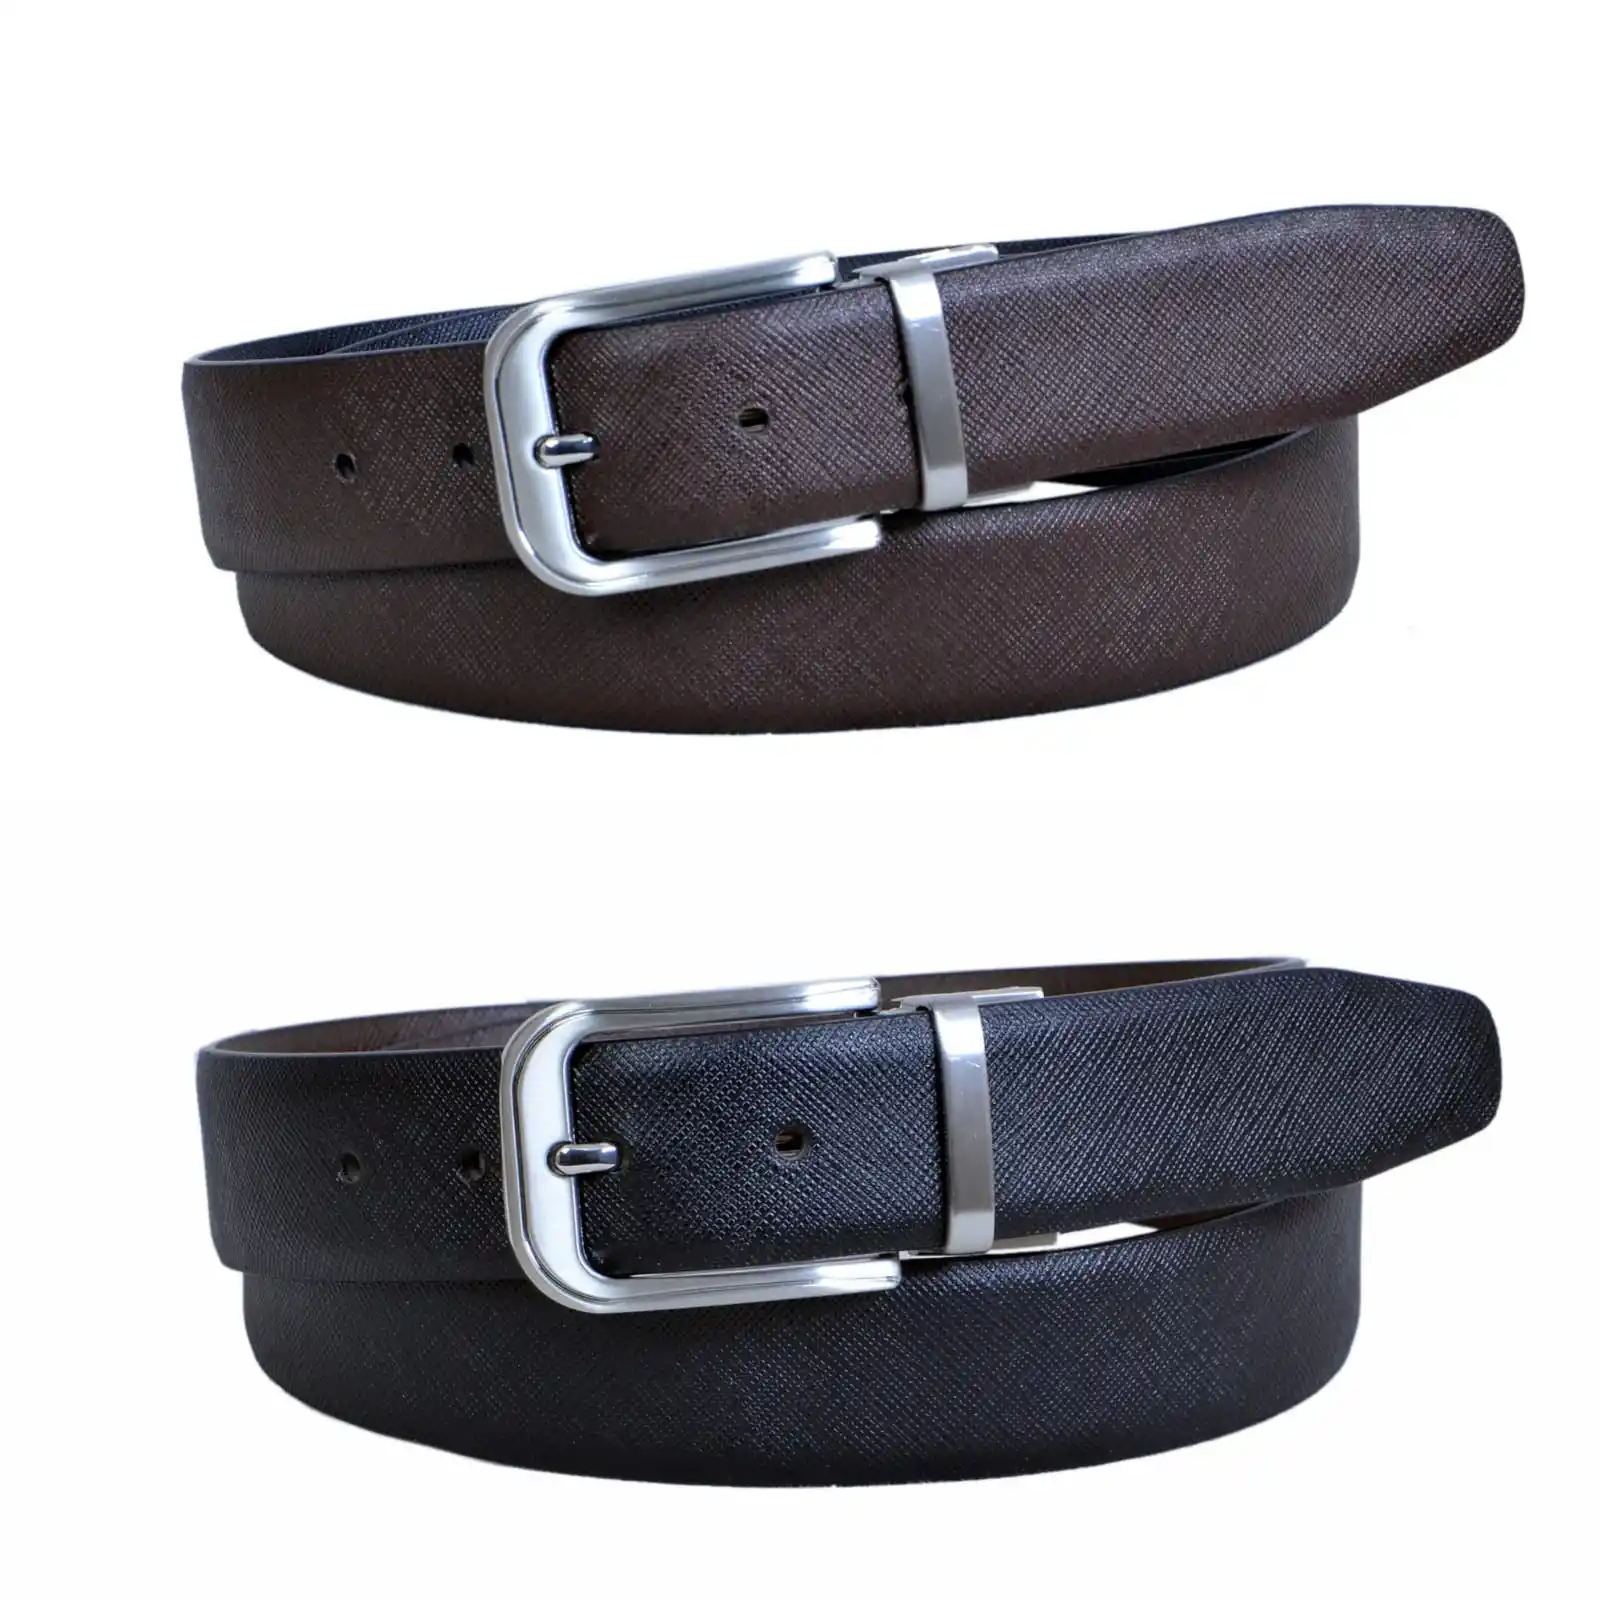 FASHION PU LEATHER BELTS FOR MEN CHEAPEST AND BEST 2022 LATEST TRENDING